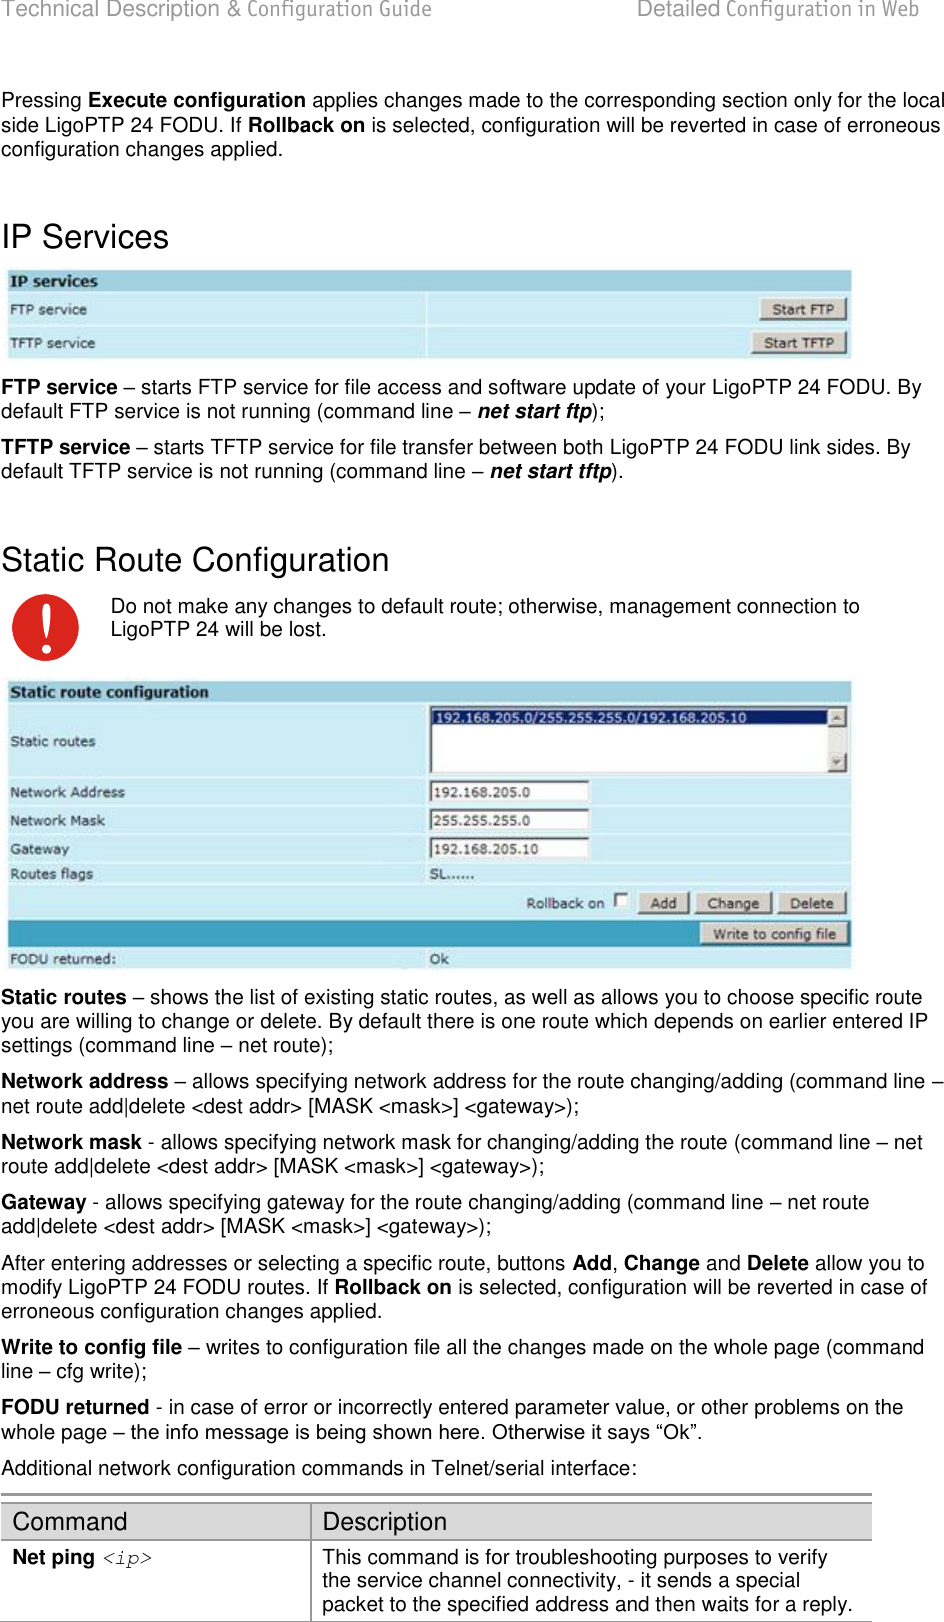 Technical Description &amp; Configuration Guide  Detailed Configuration in Web  LigoWave  Page 45 Pressing Execute configuration applies changes made to the corresponding section only for the local side LigoPTP 24 FODU. If Rollback on is selected, configuration will be reverted in case of erroneous configuration changes applied.  IP Services  FTP service – starts FTP service for file access and software update of your LigoPTP 24 FODU. By default FTP service is not running (command line  net start ftp); TFTP service – starts TFTP service for file transfer between both LigoPTP 24 FODU link sides. By default TFTP service is not running (command line  net start tftp).  Static Route Configuration  Do not make any changes to default route; otherwise, management connection to LigoPTP 24 will be lost.  Static routes  shows the list of existing static routes, as well as allows you to choose specific route you are willing to change or delete. By default there is one route which depends on earlier entered IP settings (command line  net route); Network address  allows specifying network address for the route changing/adding (command line  net route add|delete &lt;dest addr&gt; [MASK &lt;mask&gt;] &lt;gateway&gt;); Network mask - allows specifying network mask for changing/adding the route (command line  net route add|delete &lt;dest addr&gt; [MASK &lt;mask&gt;] &lt;gateway&gt;); Gateway - allows specifying gateway for the route changing/adding (command line  net route add|delete &lt;dest addr&gt; [MASK &lt;mask&gt;] &lt;gateway&gt;); After entering addresses or selecting a specific route, buttons Add, Change and Delete allow you to modify LigoPTP 24 FODU routes. If Rollback on is selected, configuration will be reverted in case of erroneous configuration changes applied. Write to config file  writes to configuration file all the changes made on the whole page (command line  cfg write); FODU returned - in case of error or incorrectly entered parameter value, or other problems on the whole page   Additional network configuration commands in Telnet/serial interface: Command Description Net ping &lt;ip&gt; This command is for troubleshooting purposes to verify the service channel connectivity, - it sends a special packet to the specified address and then waits for a reply. 